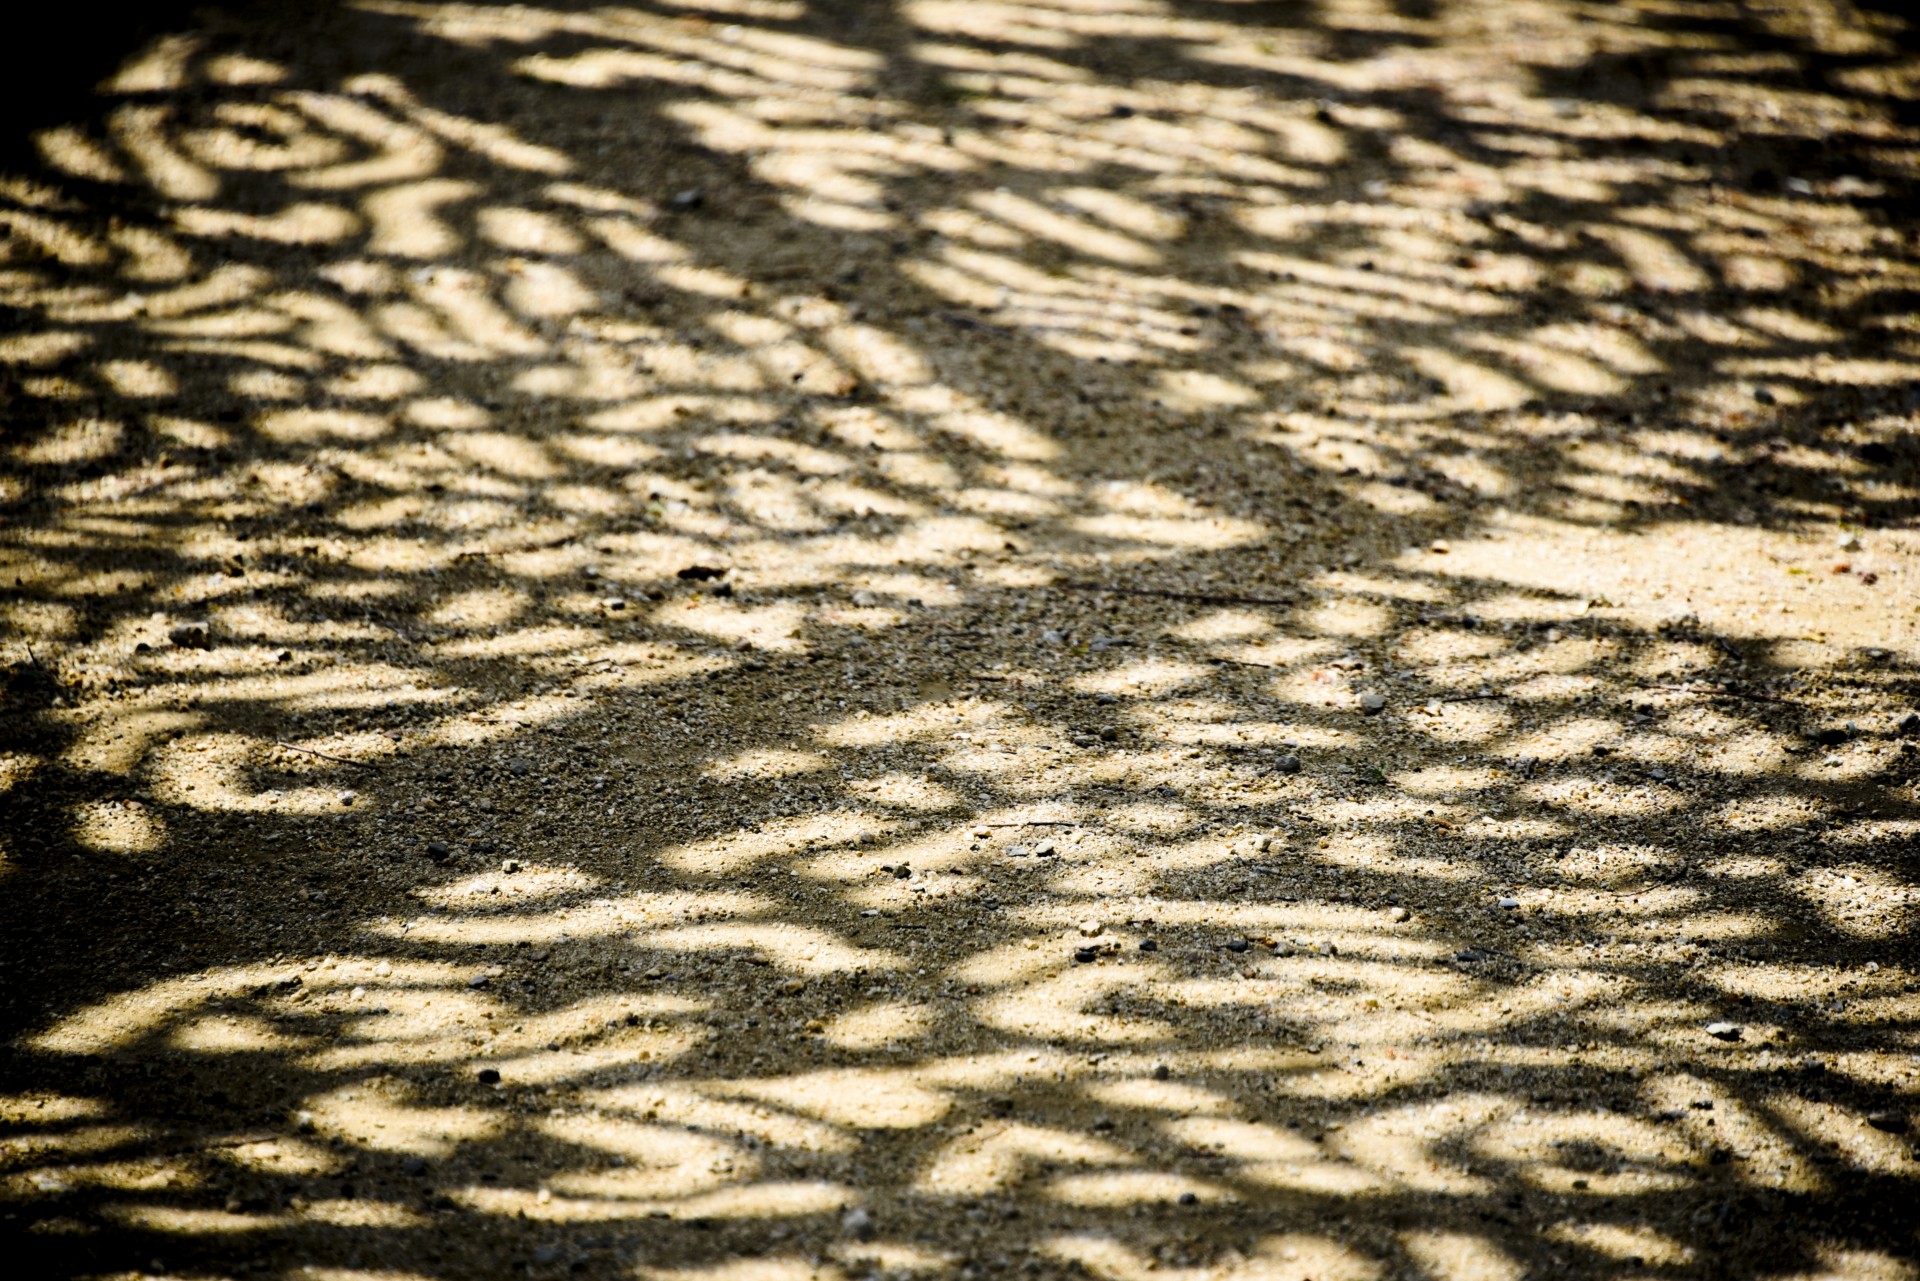 Patterns In Shadow